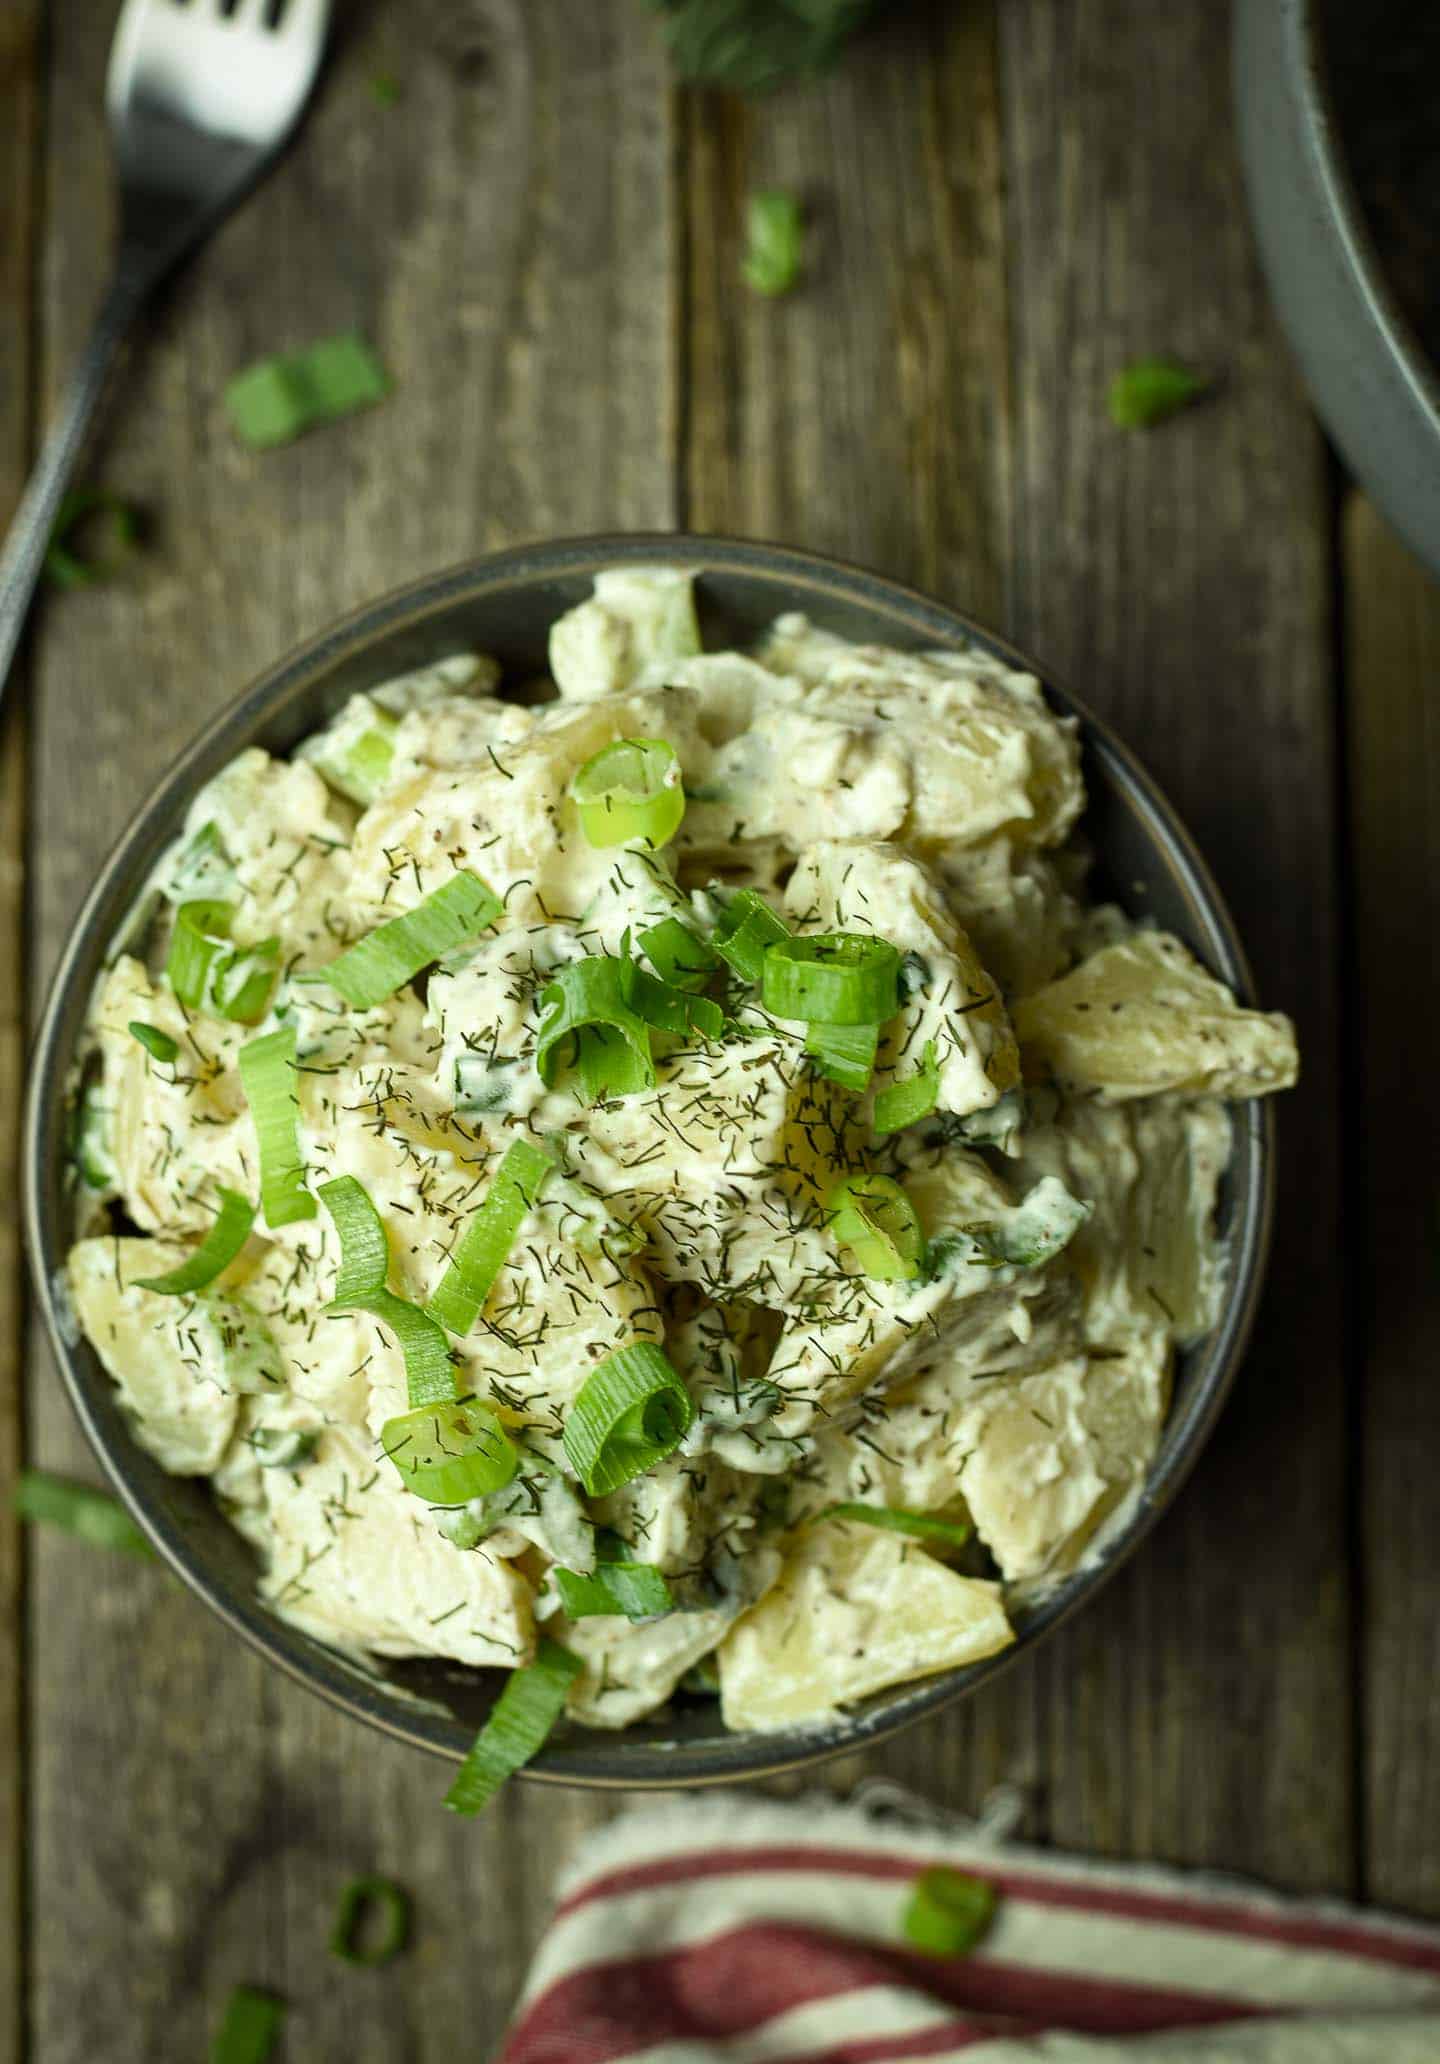 Potato salad with dill and chopped green onions.